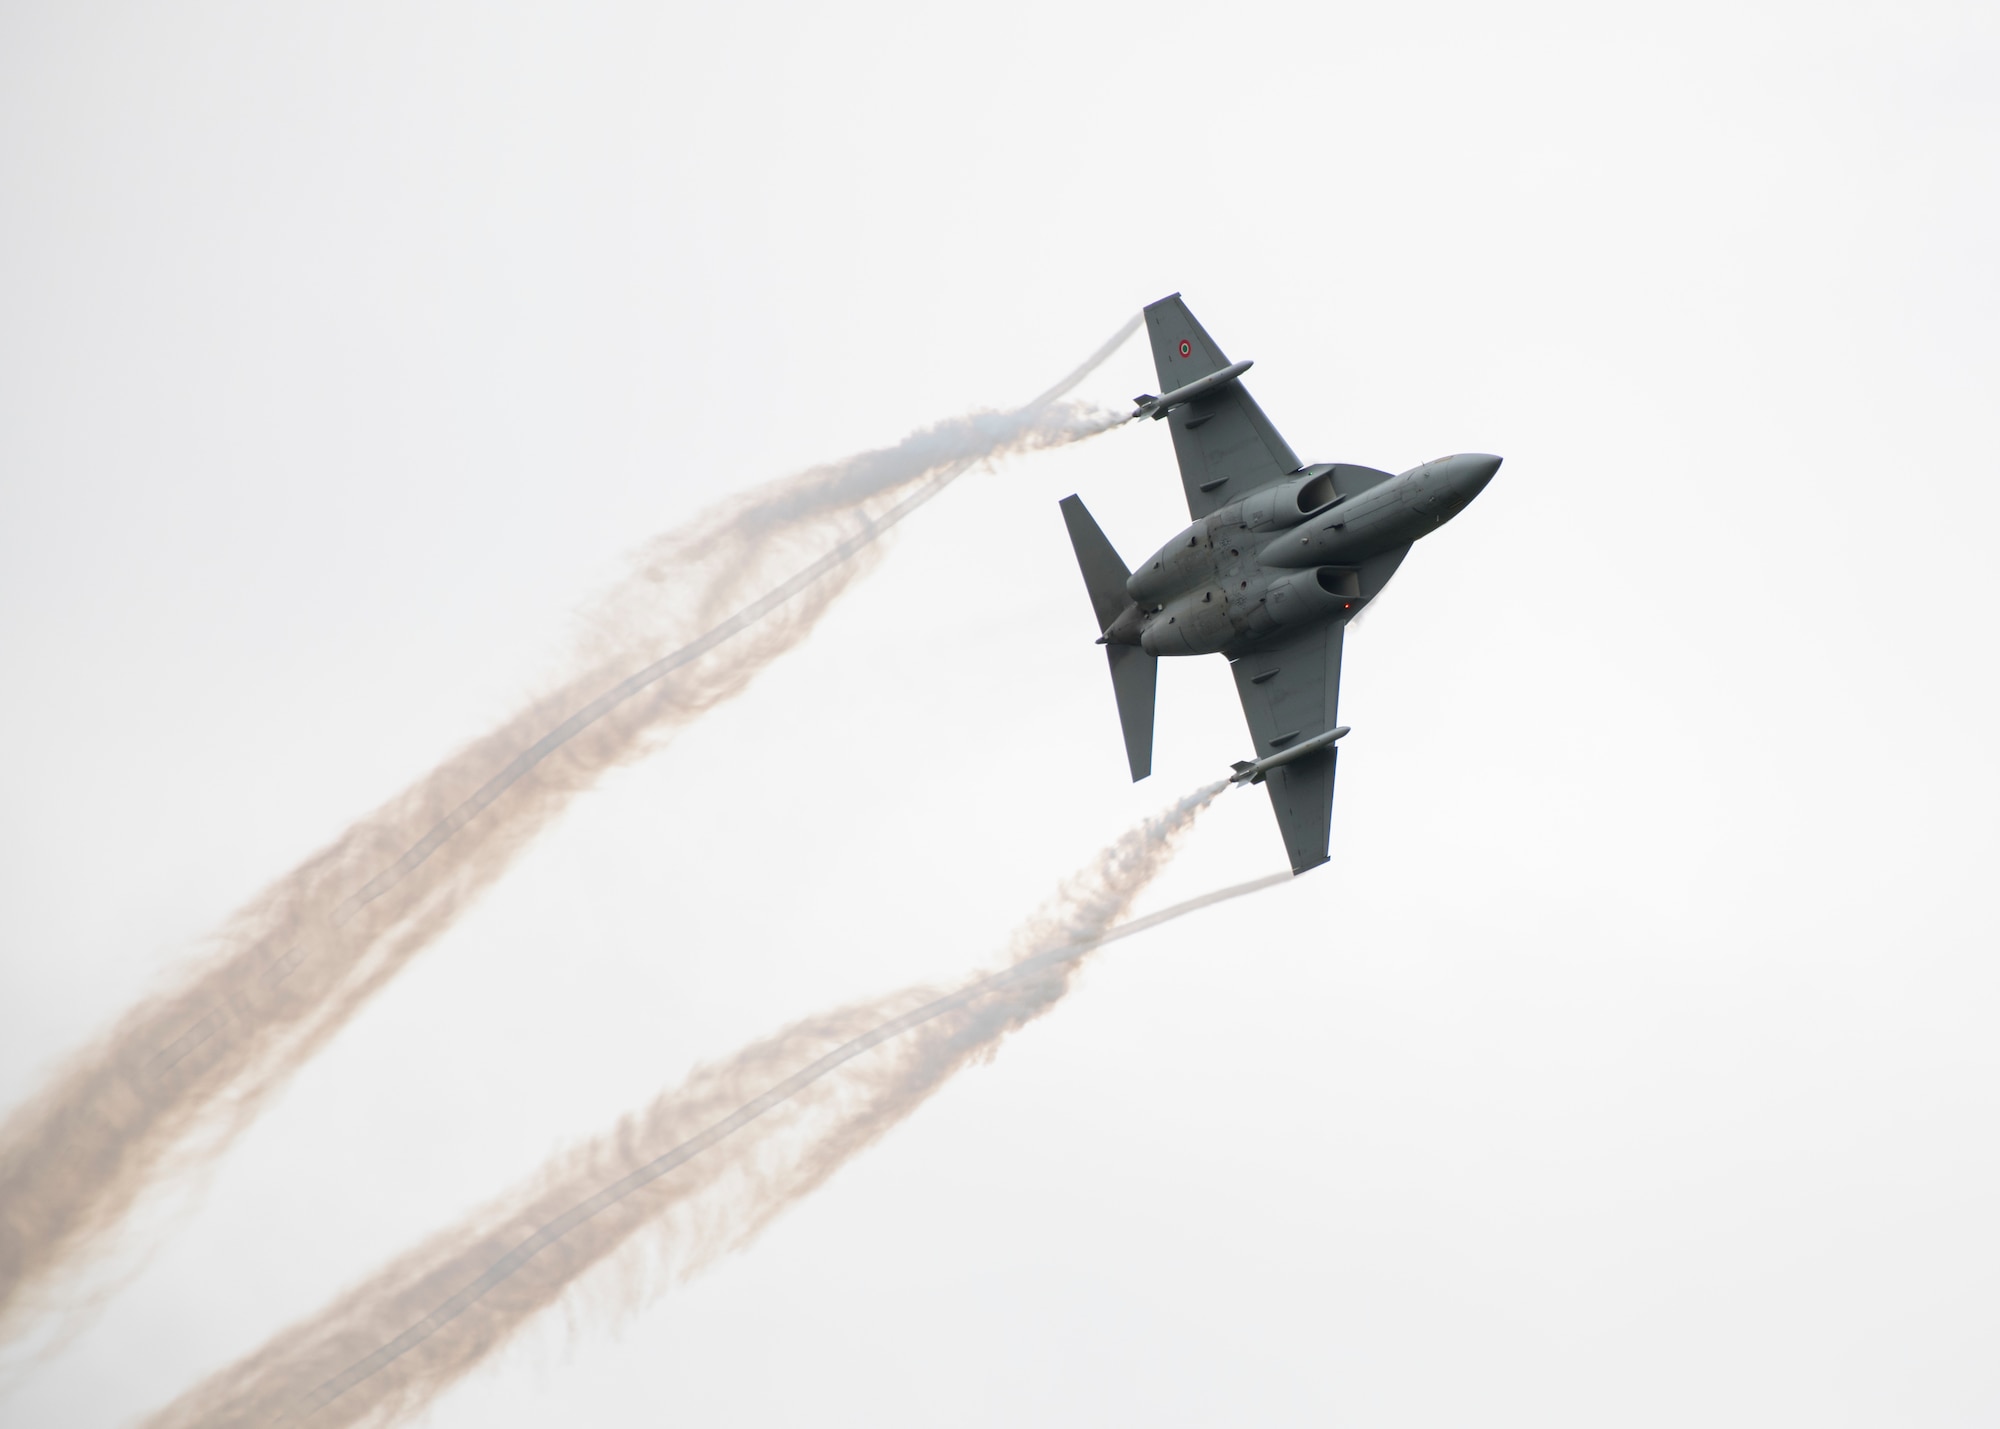 An Italian Air Force Leonardo T-346A flies past the audience during the 2019 Royal International Air Tattoo at RAF Fairford, England, July 20, 2019. This year, RIAT commemorated the 70th anniversary of NATO and highlighted the United States' enduring commitment to its European allies. (U.S. Air Force photo by Airman 1st Class Jennifer Zima)